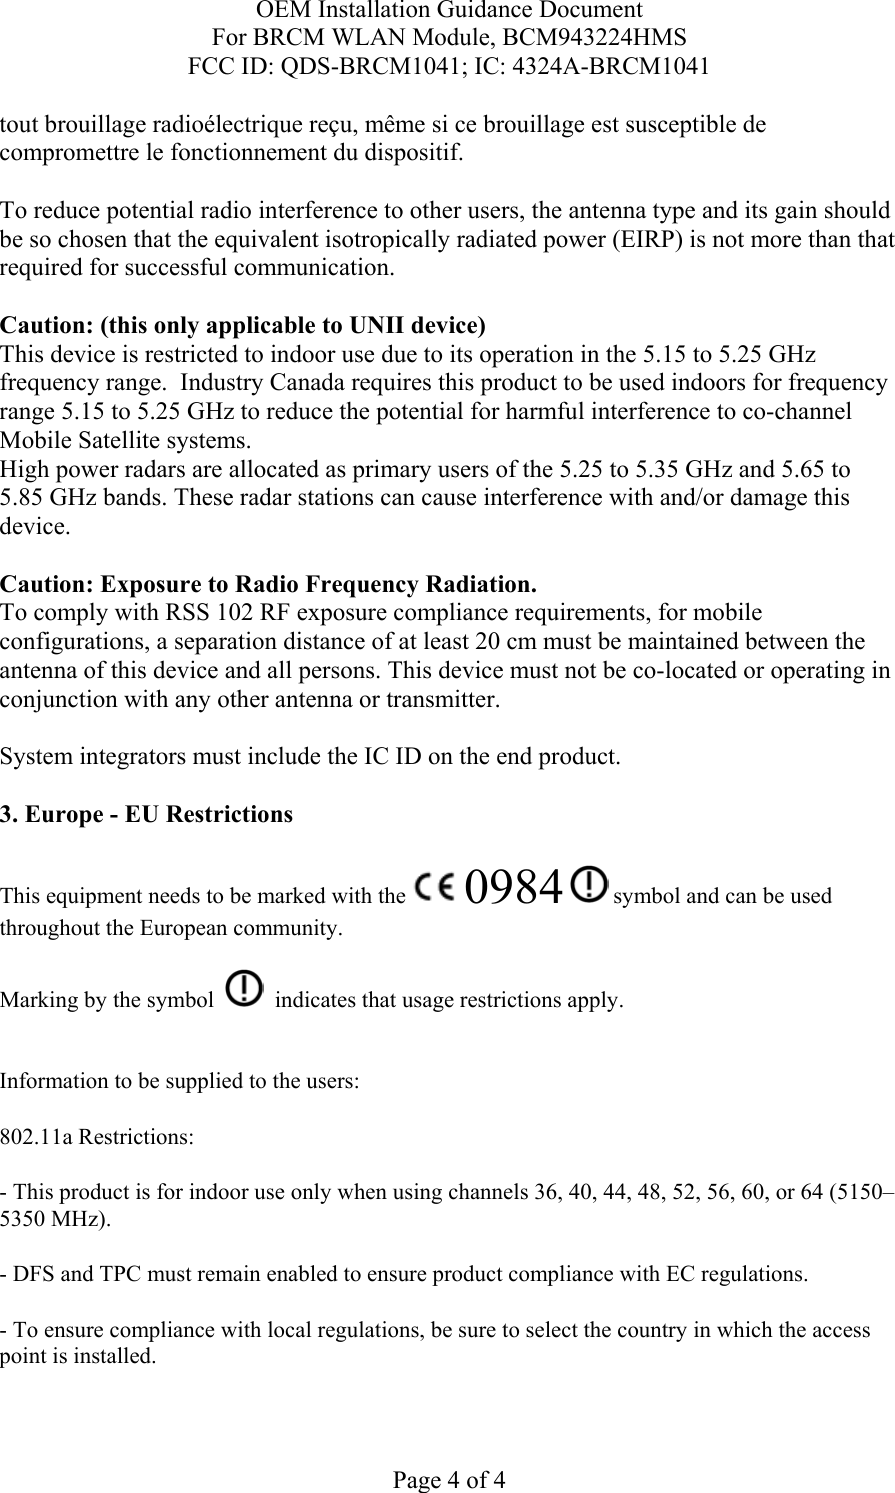 OEM Installation Guidance Document For BRCM WLAN Module, BCM943224HMS FCC ID: QDS-BRCM1041; IC: 4324A-BRCM1041  Page 4 of 4 tout brouillage radioélectrique reçu, même si ce brouillage est susceptible de compromettre le fonctionnement du dispositif.  To reduce potential radio interference to other users, the antenna type and its gain should be so chosen that the equivalent isotropically radiated power (EIRP) is not more than that required for successful communication.  Caution: (this only applicable to UNII device) This device is restricted to indoor use due to its operation in the 5.15 to 5.25 GHz frequency range.  Industry Canada requires this product to be used indoors for frequency range 5.15 to 5.25 GHz to reduce the potential for harmful interference to co-channel Mobile Satellite systems. High power radars are allocated as primary users of the 5.25 to 5.35 GHz and 5.65 to 5.85 GHz bands. These radar stations can cause interference with and/or damage this device.  Caution: Exposure to Radio Frequency Radiation. To comply with RSS 102 RF exposure compliance requirements, for mobile configurations, a separation distance of at least 20 cm must be maintained between the antenna of this device and all persons. This device must not be co-located or operating in conjunction with any other antenna or transmitter.  System integrators must include the IC ID on the end product.   3. Europe - EU Restrictions This equipment needs to be marked with the   0984  symbol and can be used throughout the European community.  Marking by the symbol     indicates that usage restrictions apply.  Information to be supplied to the users: 802.11a Restrictions: - This product is for indoor use only when using channels 36, 40, 44, 48, 52, 56, 60, or 64 (5150–5350 MHz).       - DFS and TPC must remain enabled to ensure product compliance with EC regulations.      - To ensure compliance with local regulations, be sure to select the country in which the access point is installed. 